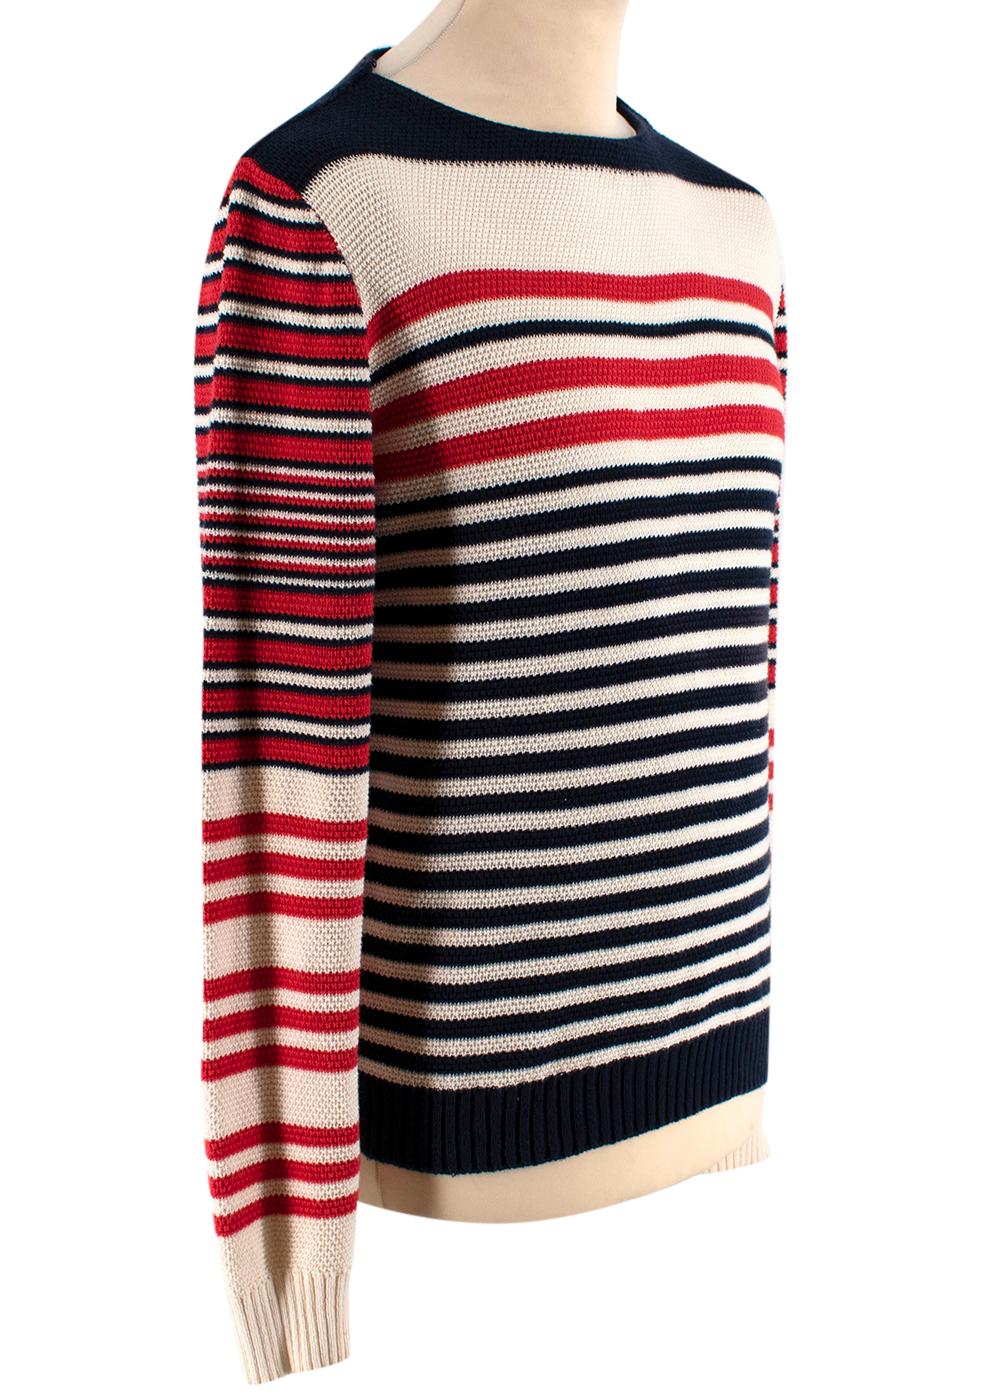 Alexander McQueen Red and Navy Striped Knit Jumper

- Navy blue, red, and cream striped
- Boatneck
- Soft fabric
- Long sleeve

Materials: 
92% Cotton
8% Cashmere

Made in Italy
Dry Clean only

Measurements:
Approx. 
Measurements are taken laying